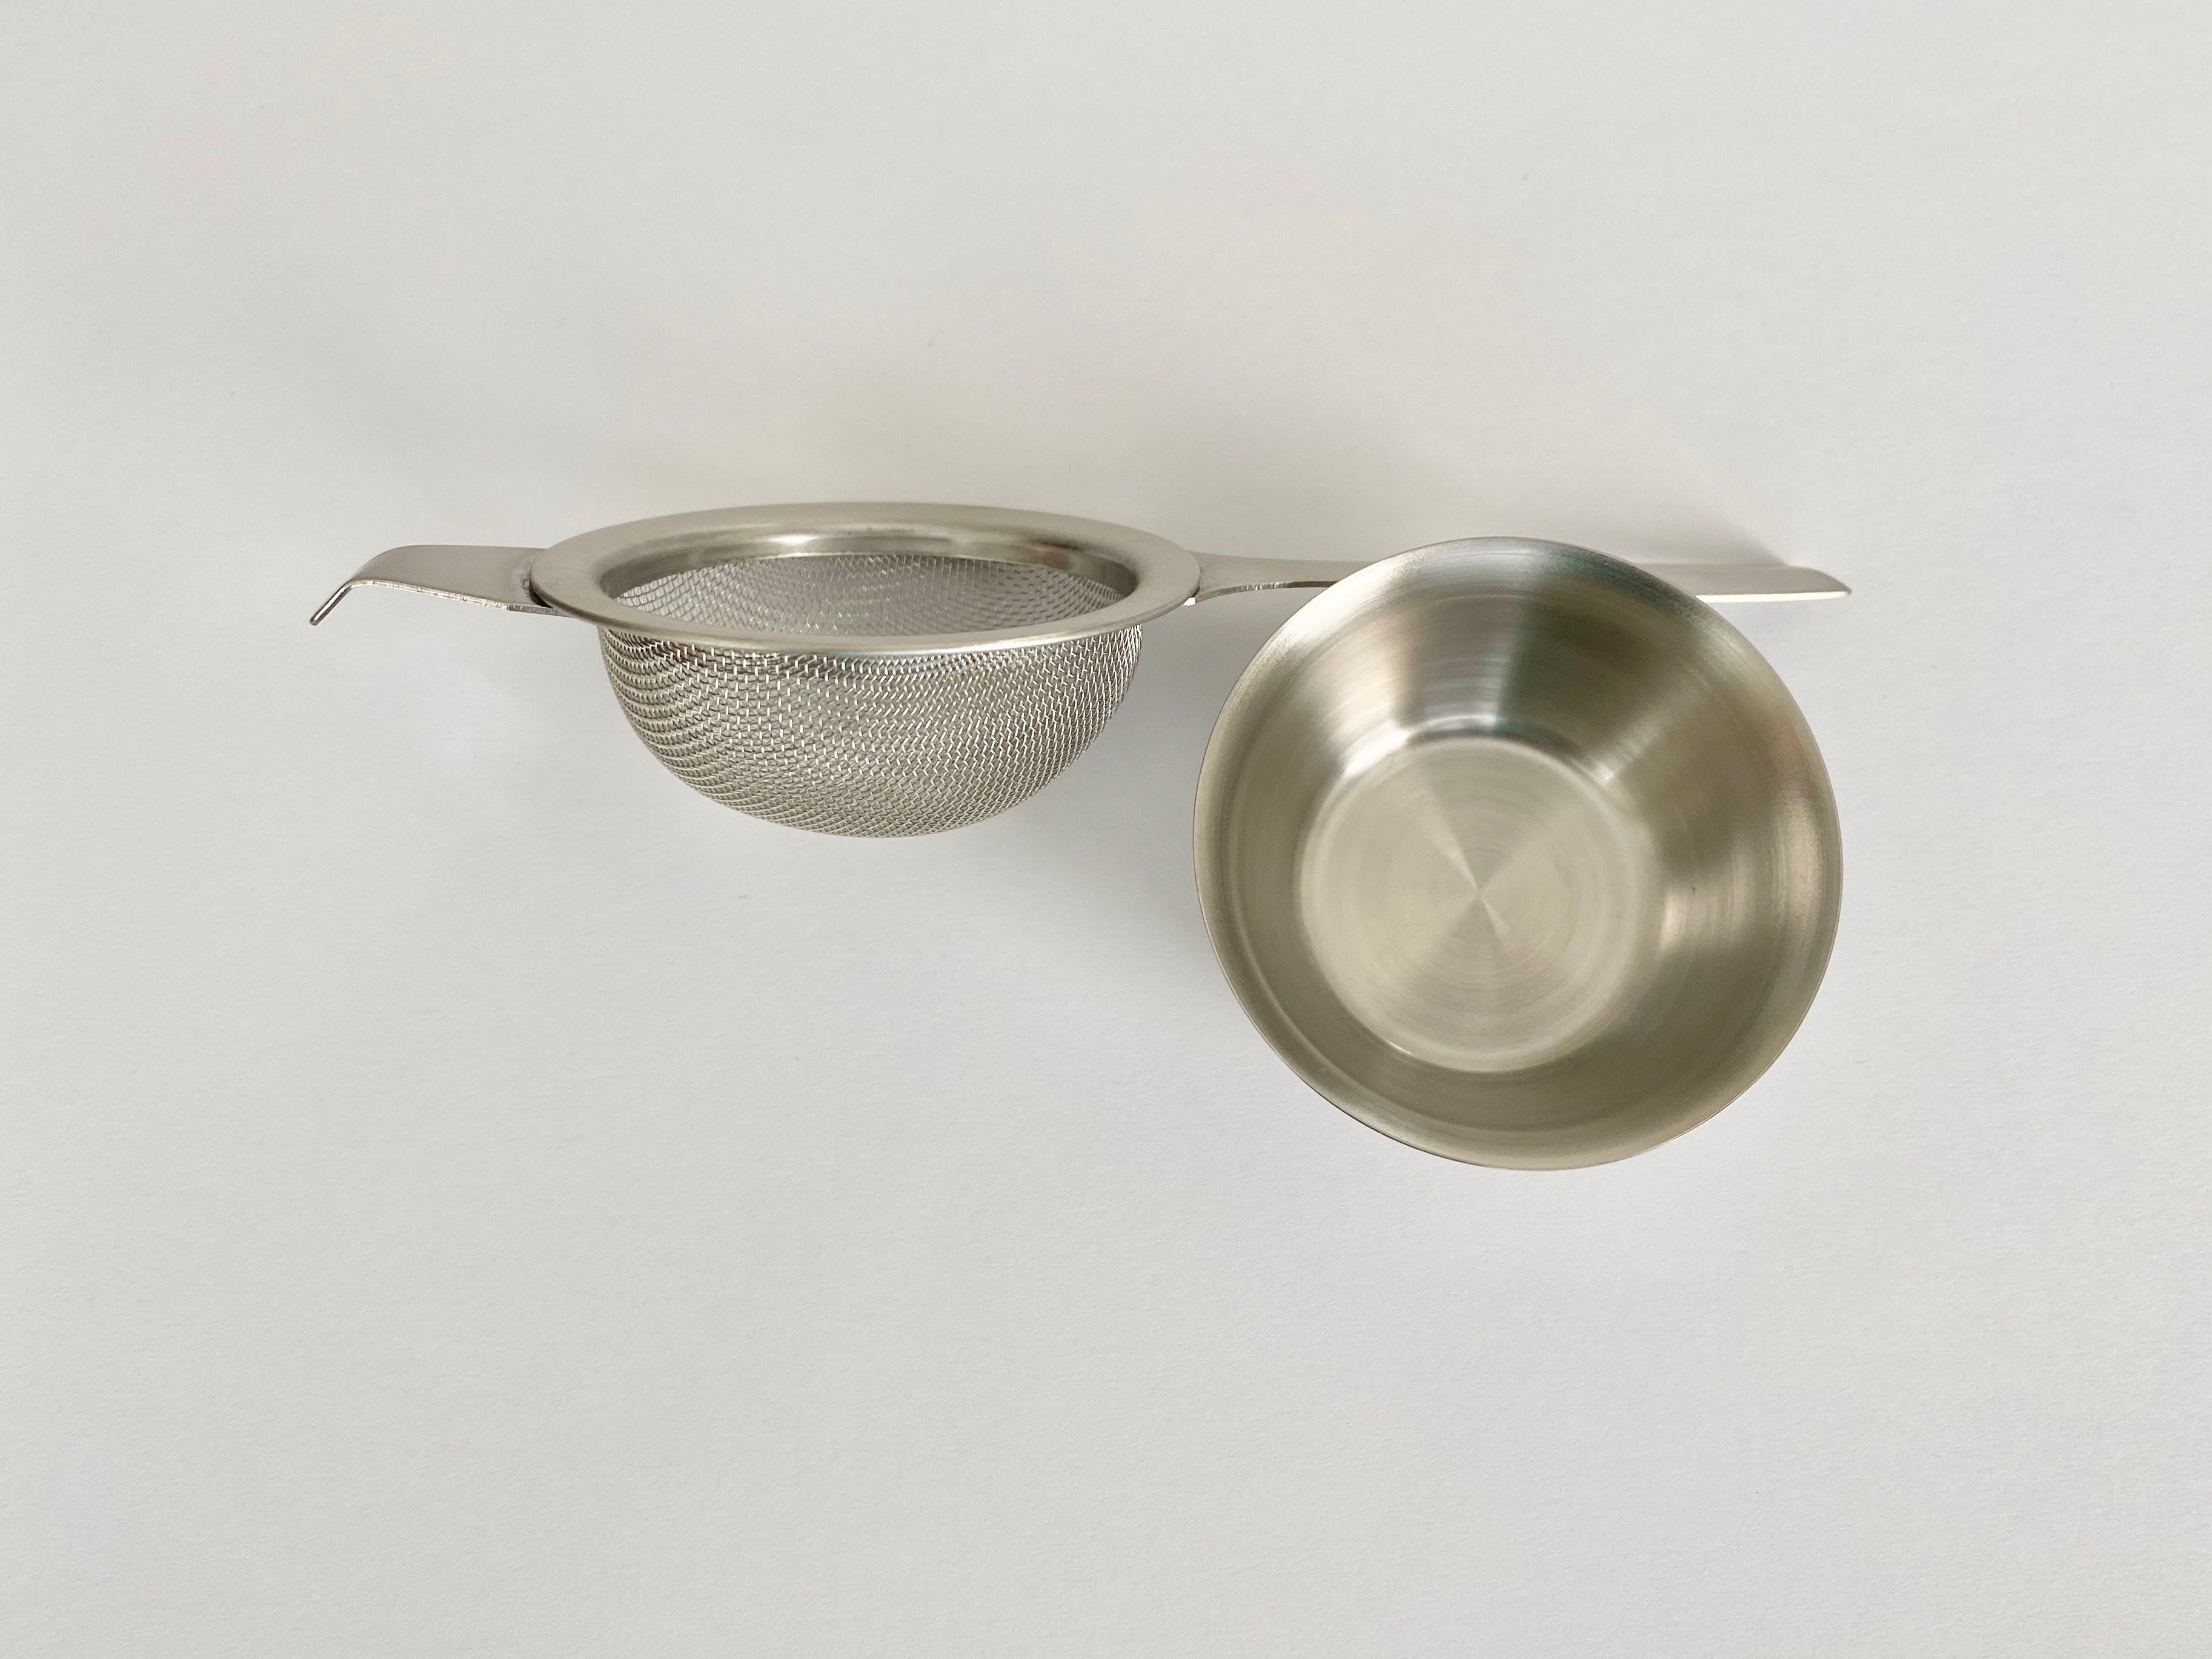 Tea Strainer - Stainless Steel with drip tray